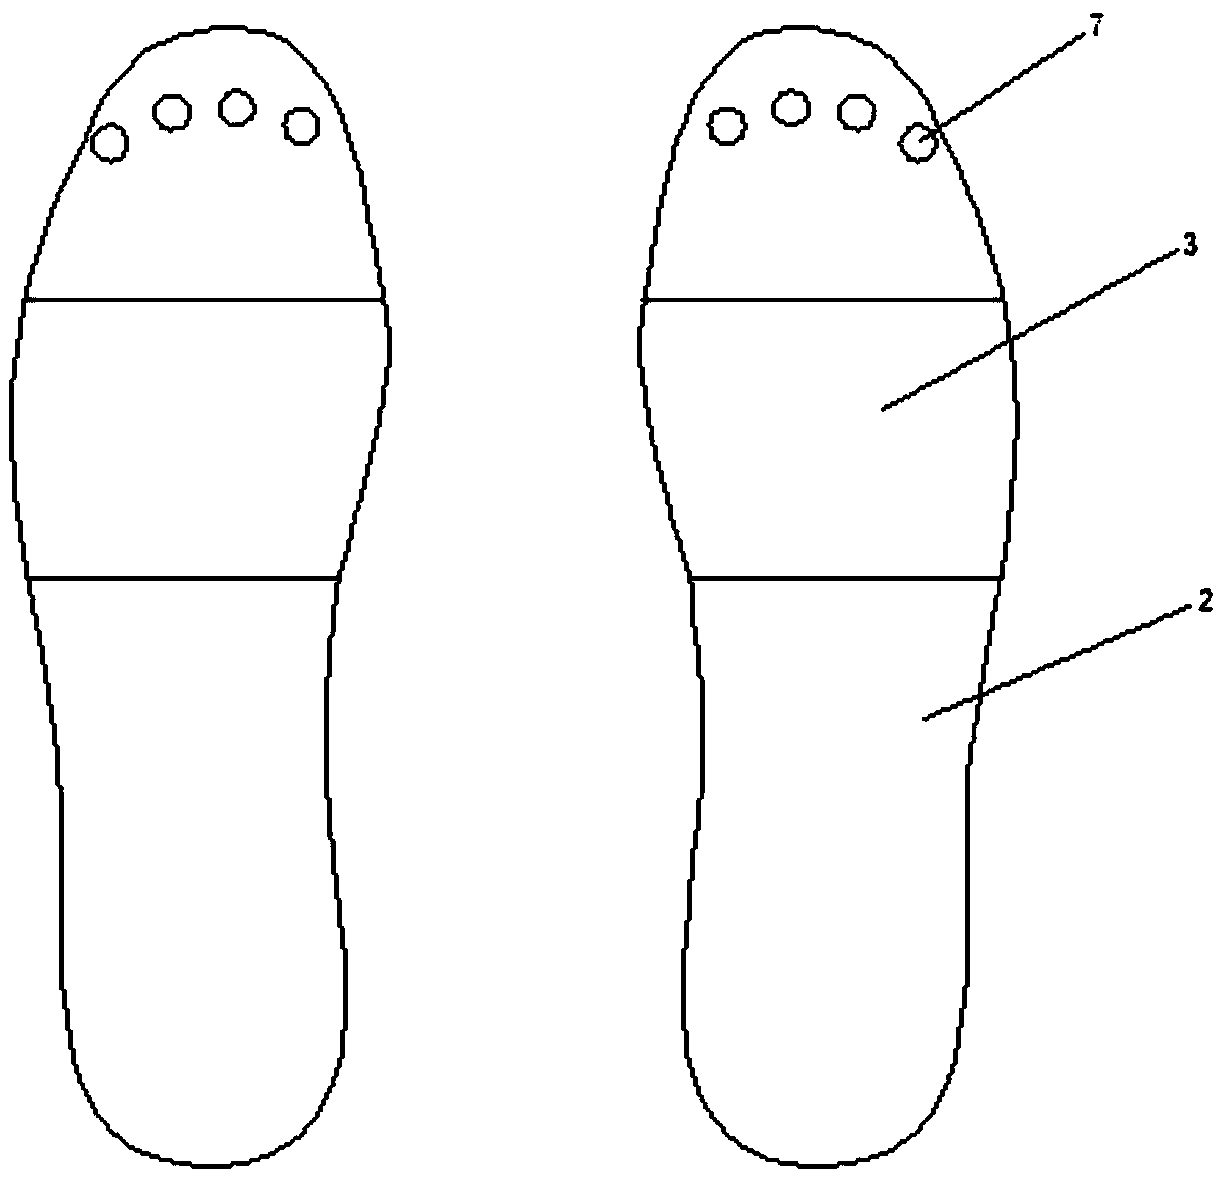 Air blowing slippers capable of preventing dermatophytosis and suitable for using at home in summer